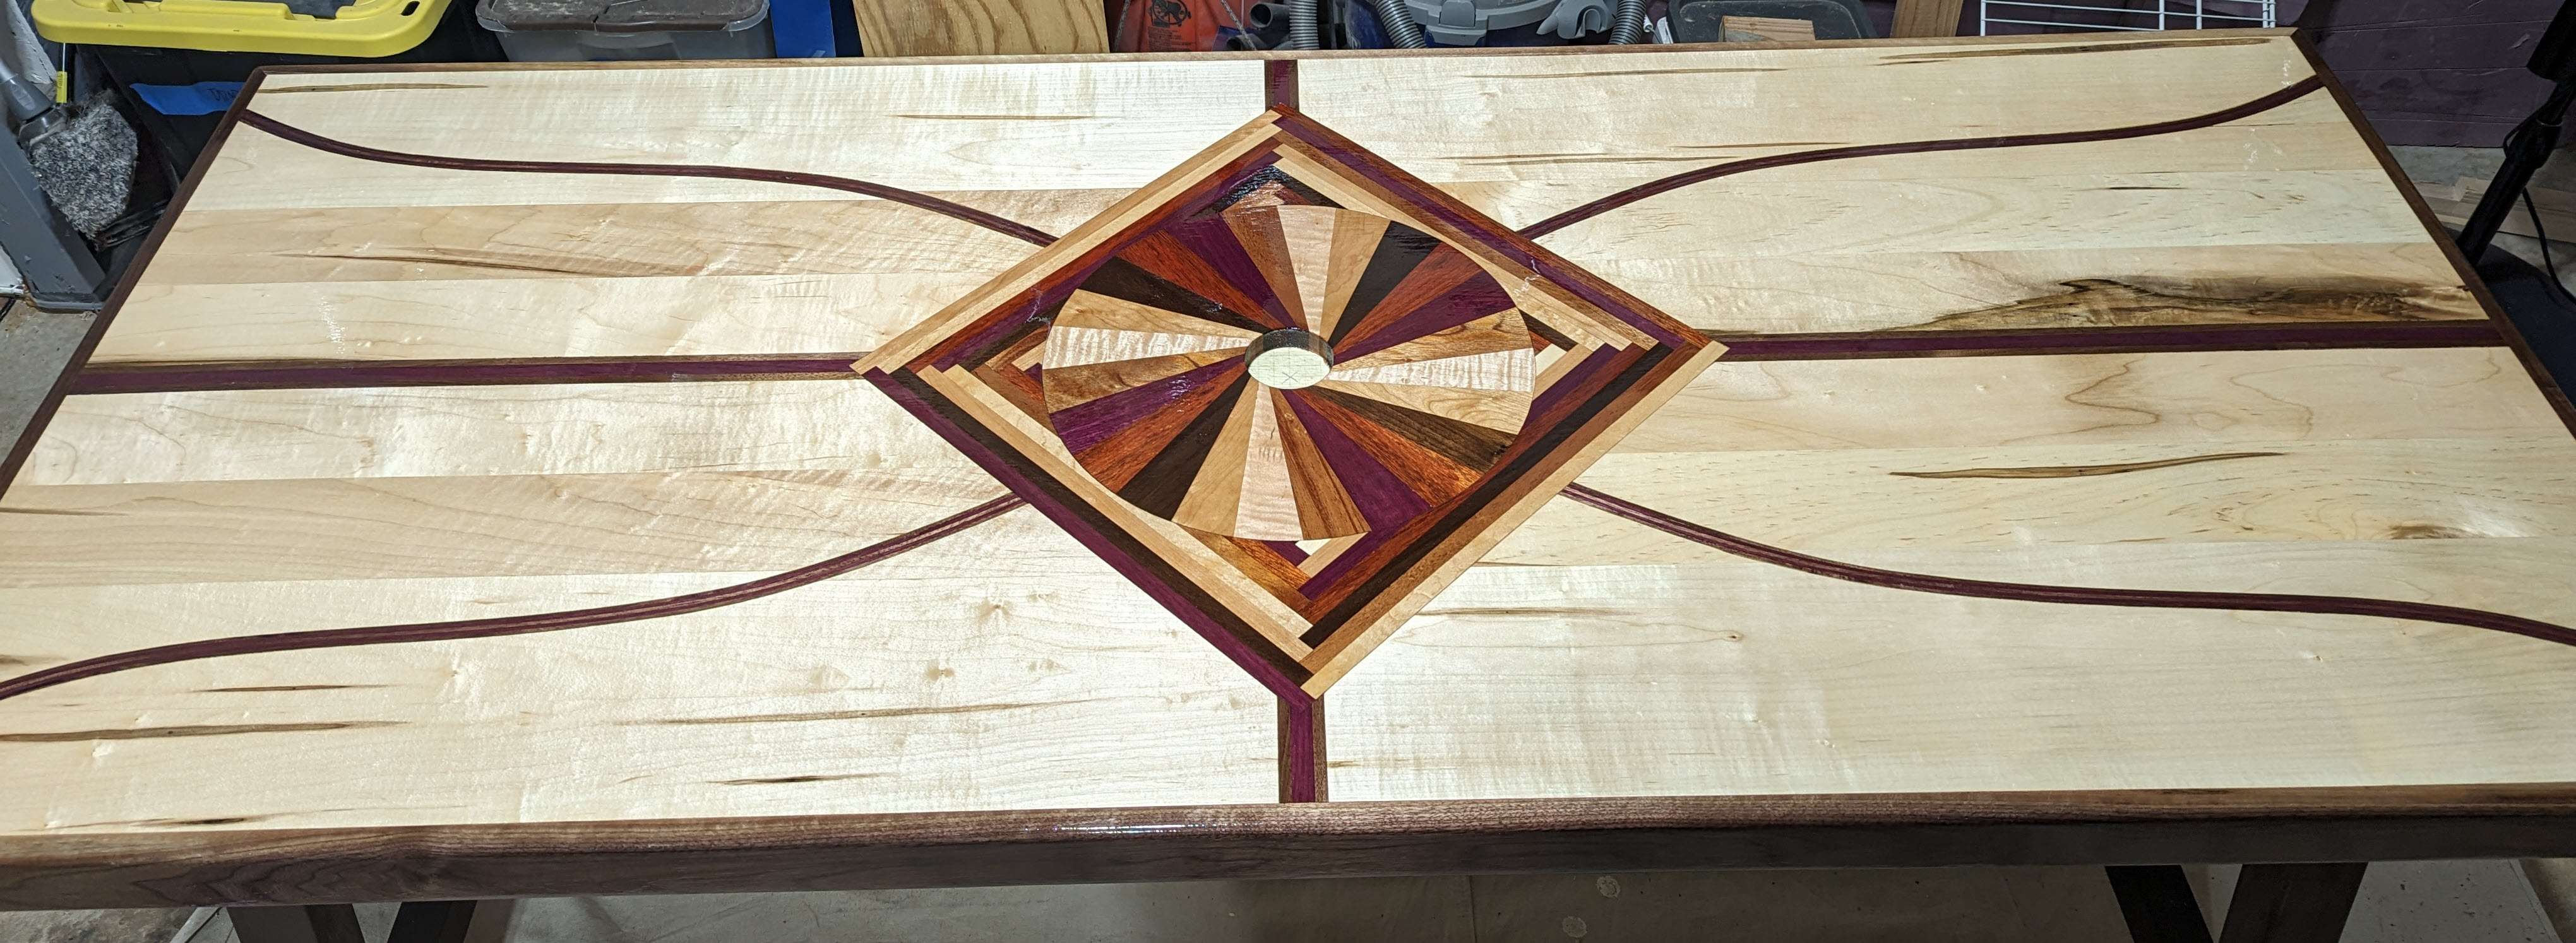 Picure table inlay detail